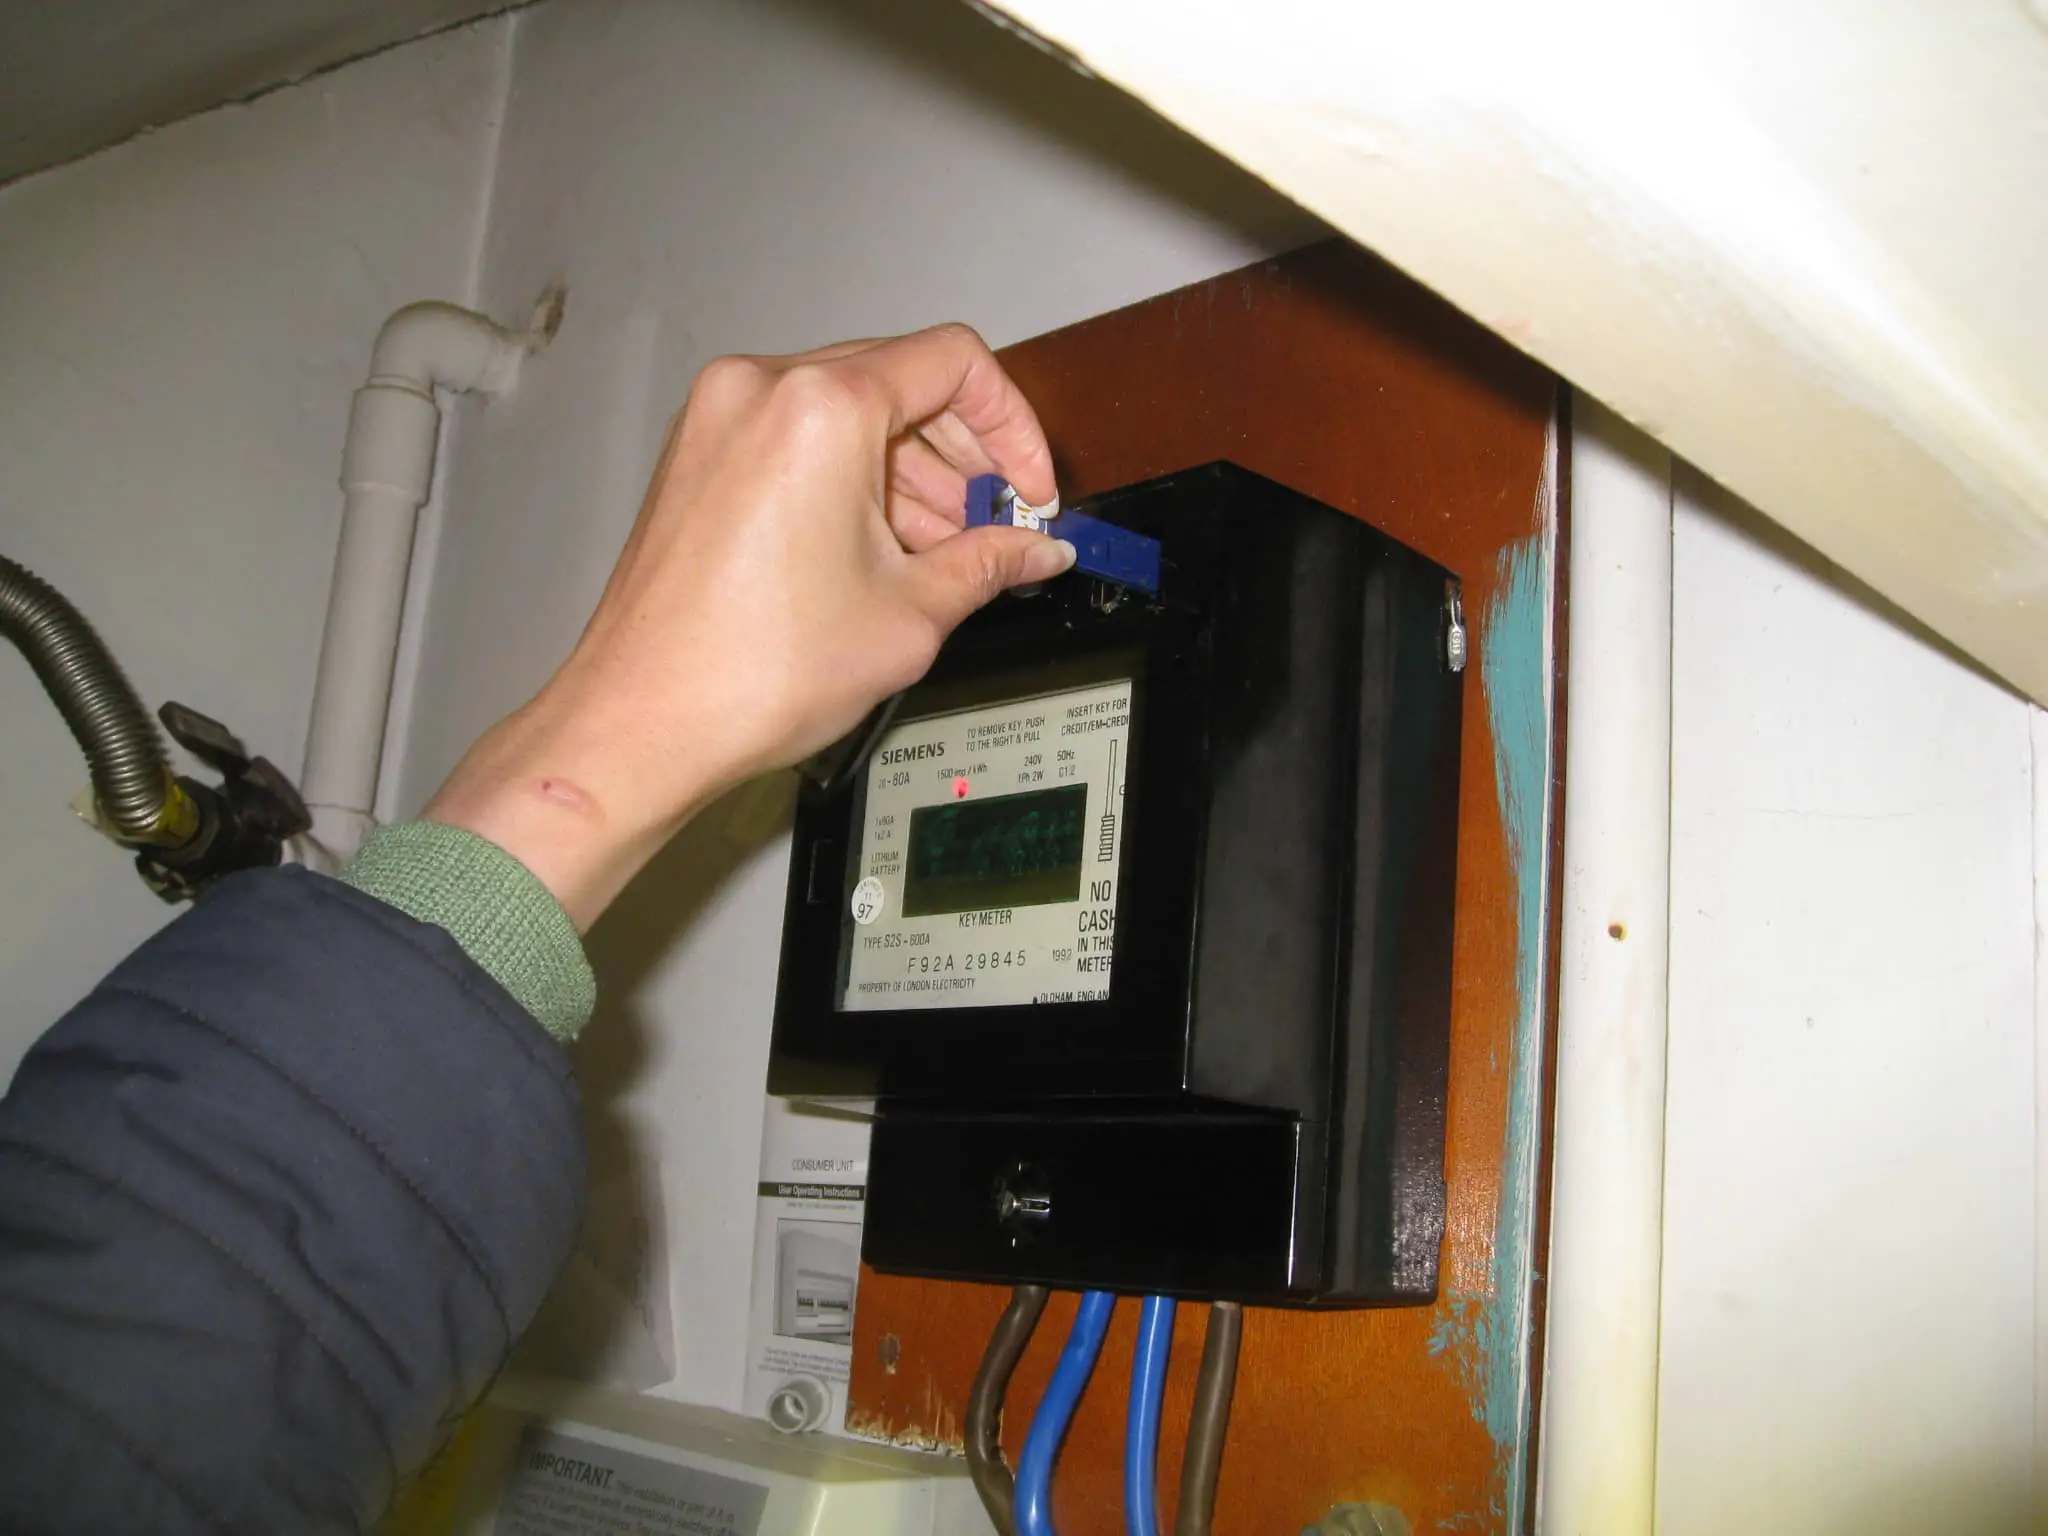 Person putting an Electricity key into a meter